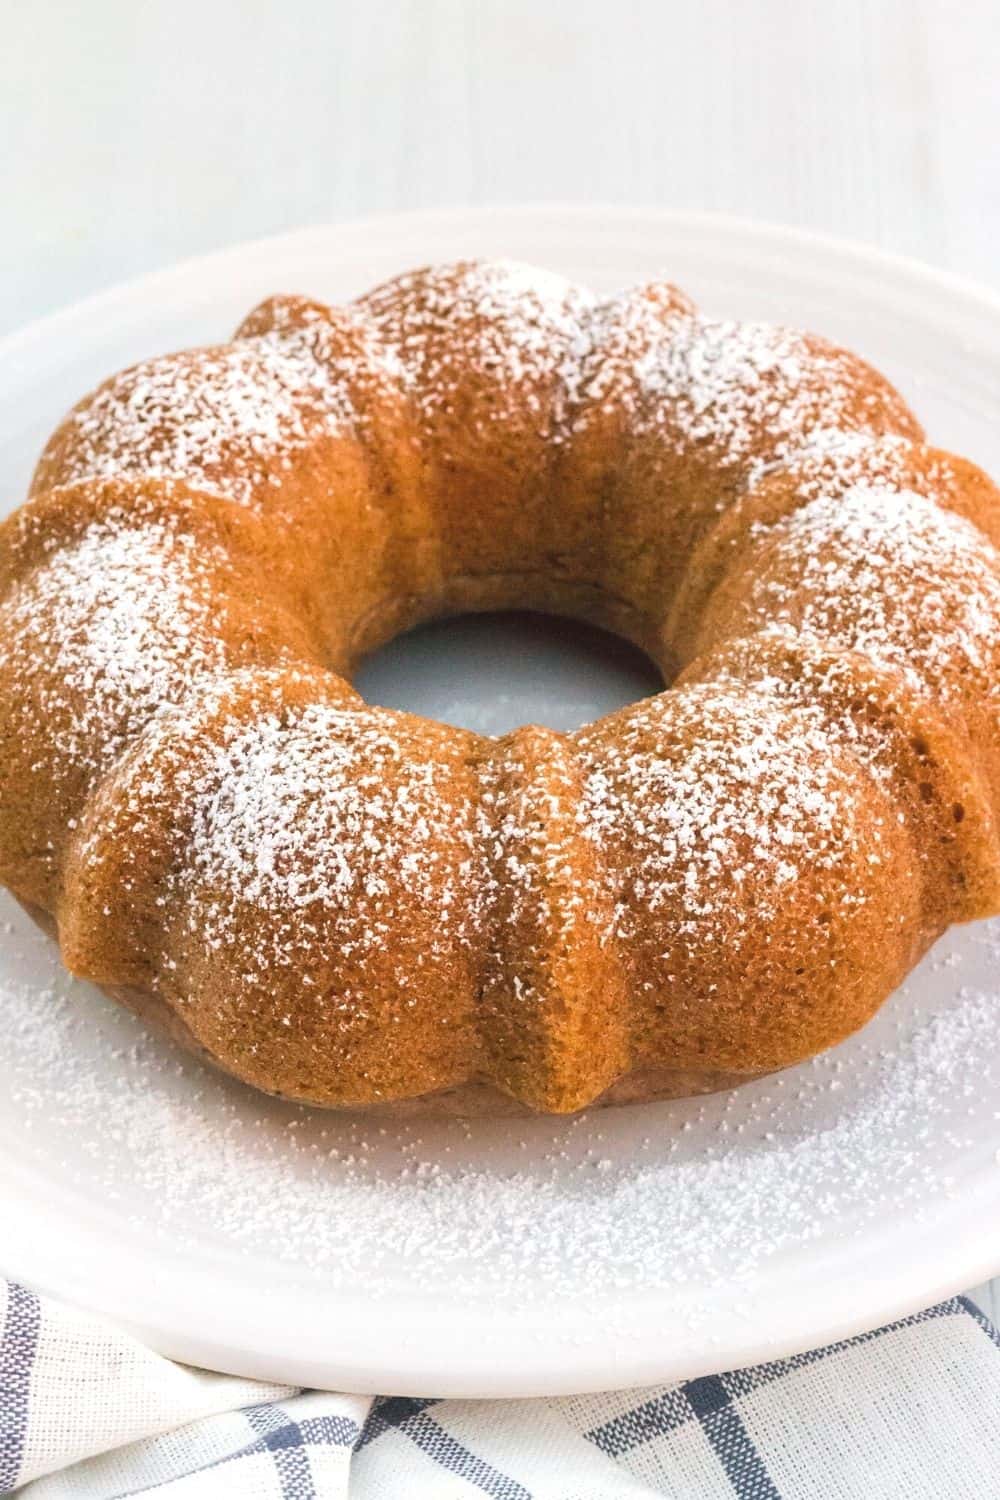 pressure cooker applesauce bundt cake sprinkled with powdered sugar and served on a white plate